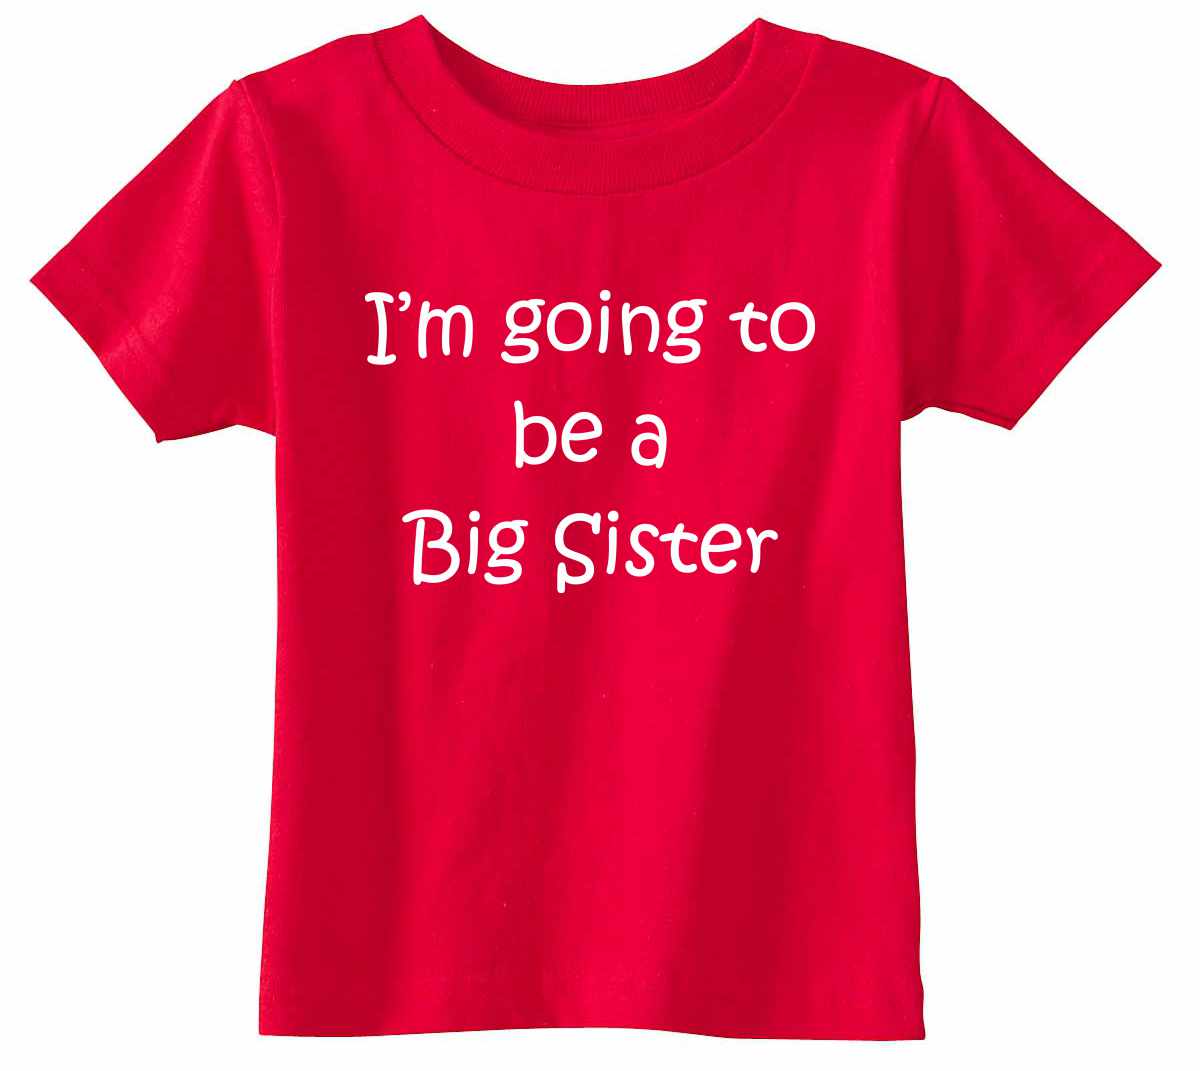 I'M GOING TO BE A BIG SISTER Infant/Toddler 